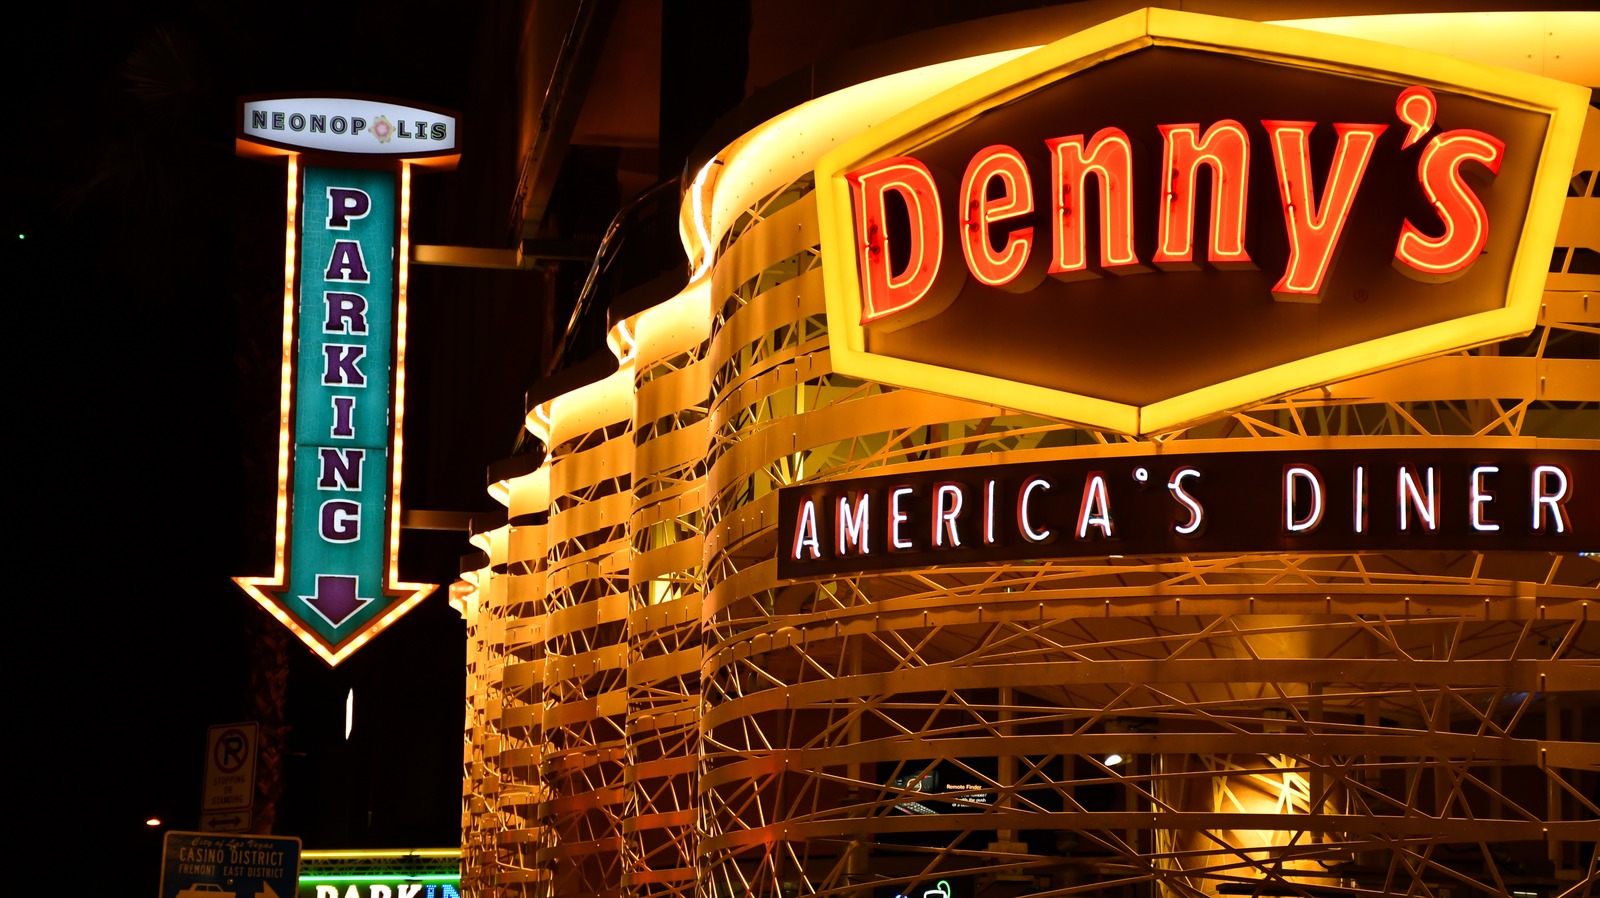 show me your Denny's. This is ours in Las Vegas, Nevada on Fremont